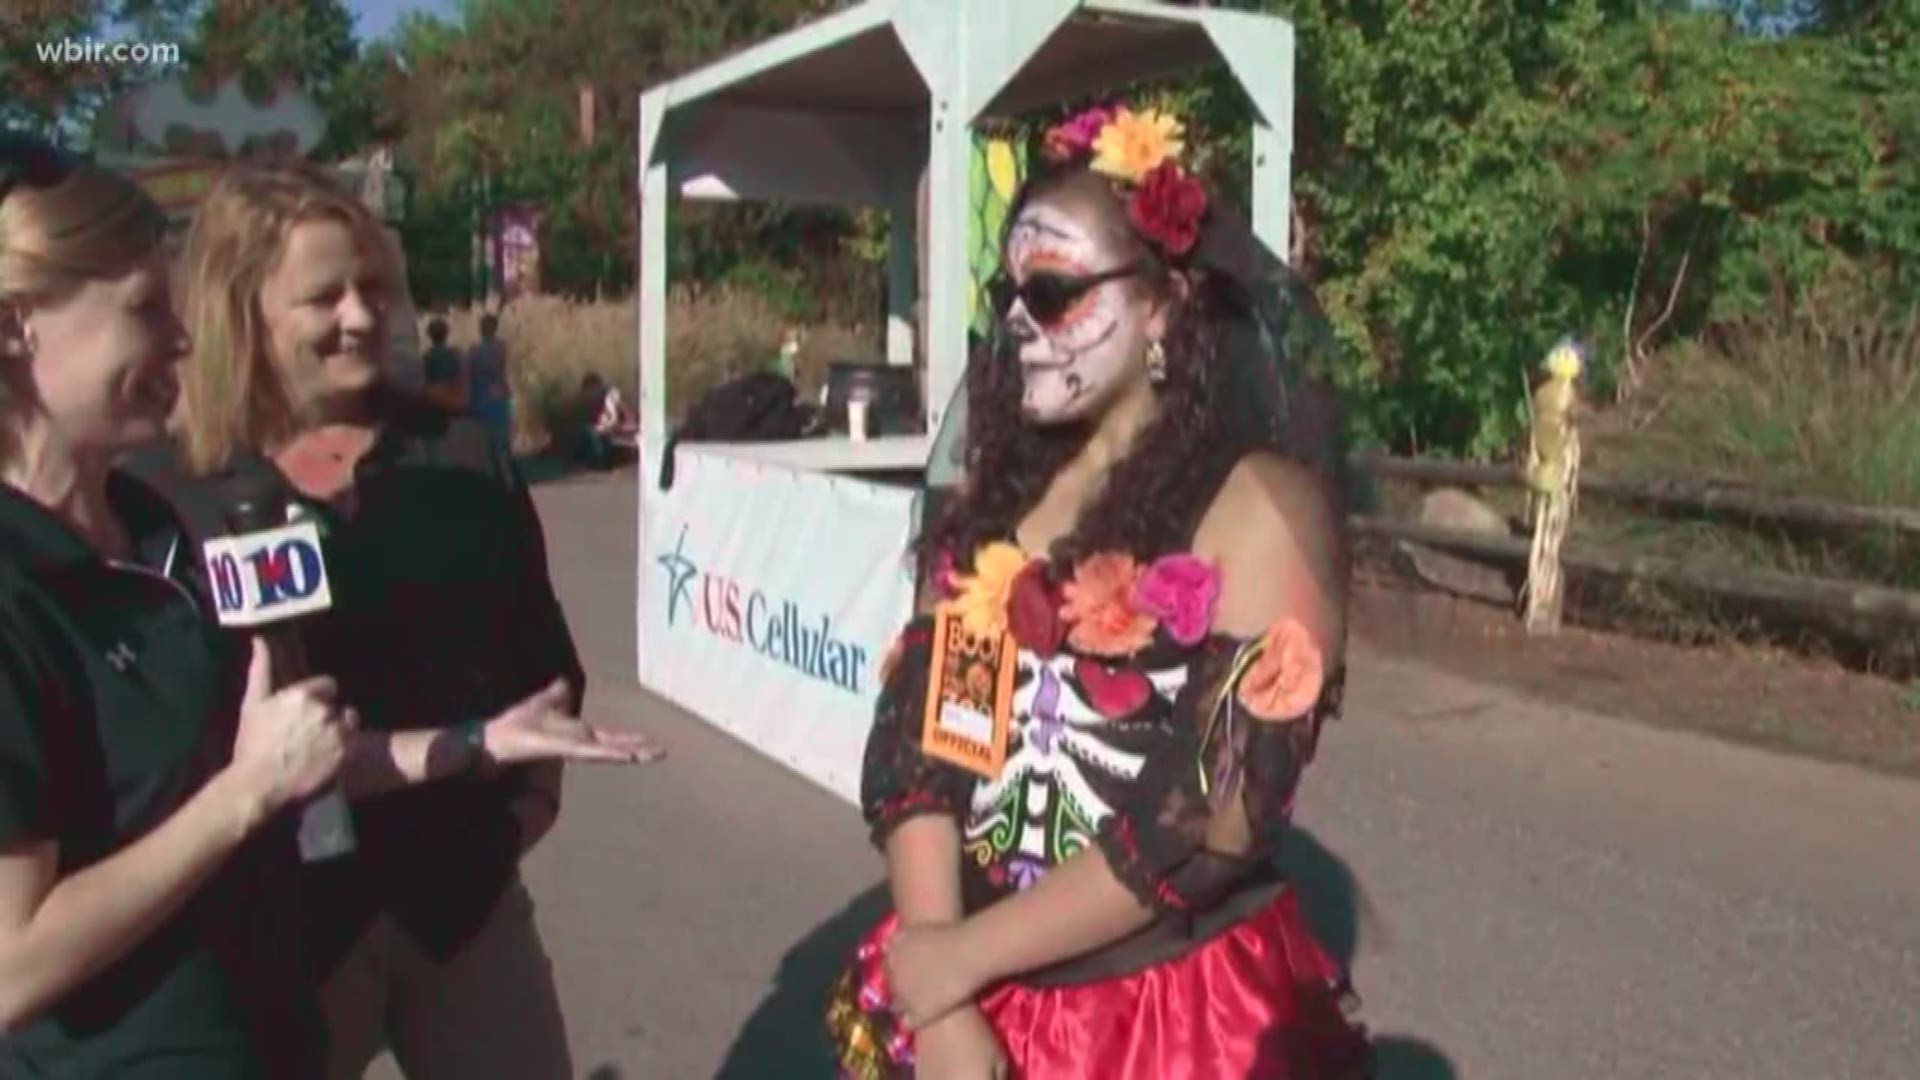 10News Meteorologist Cassie Nall talks to organizers and volunteers as things start to get spooky at Zoo Knoxville.